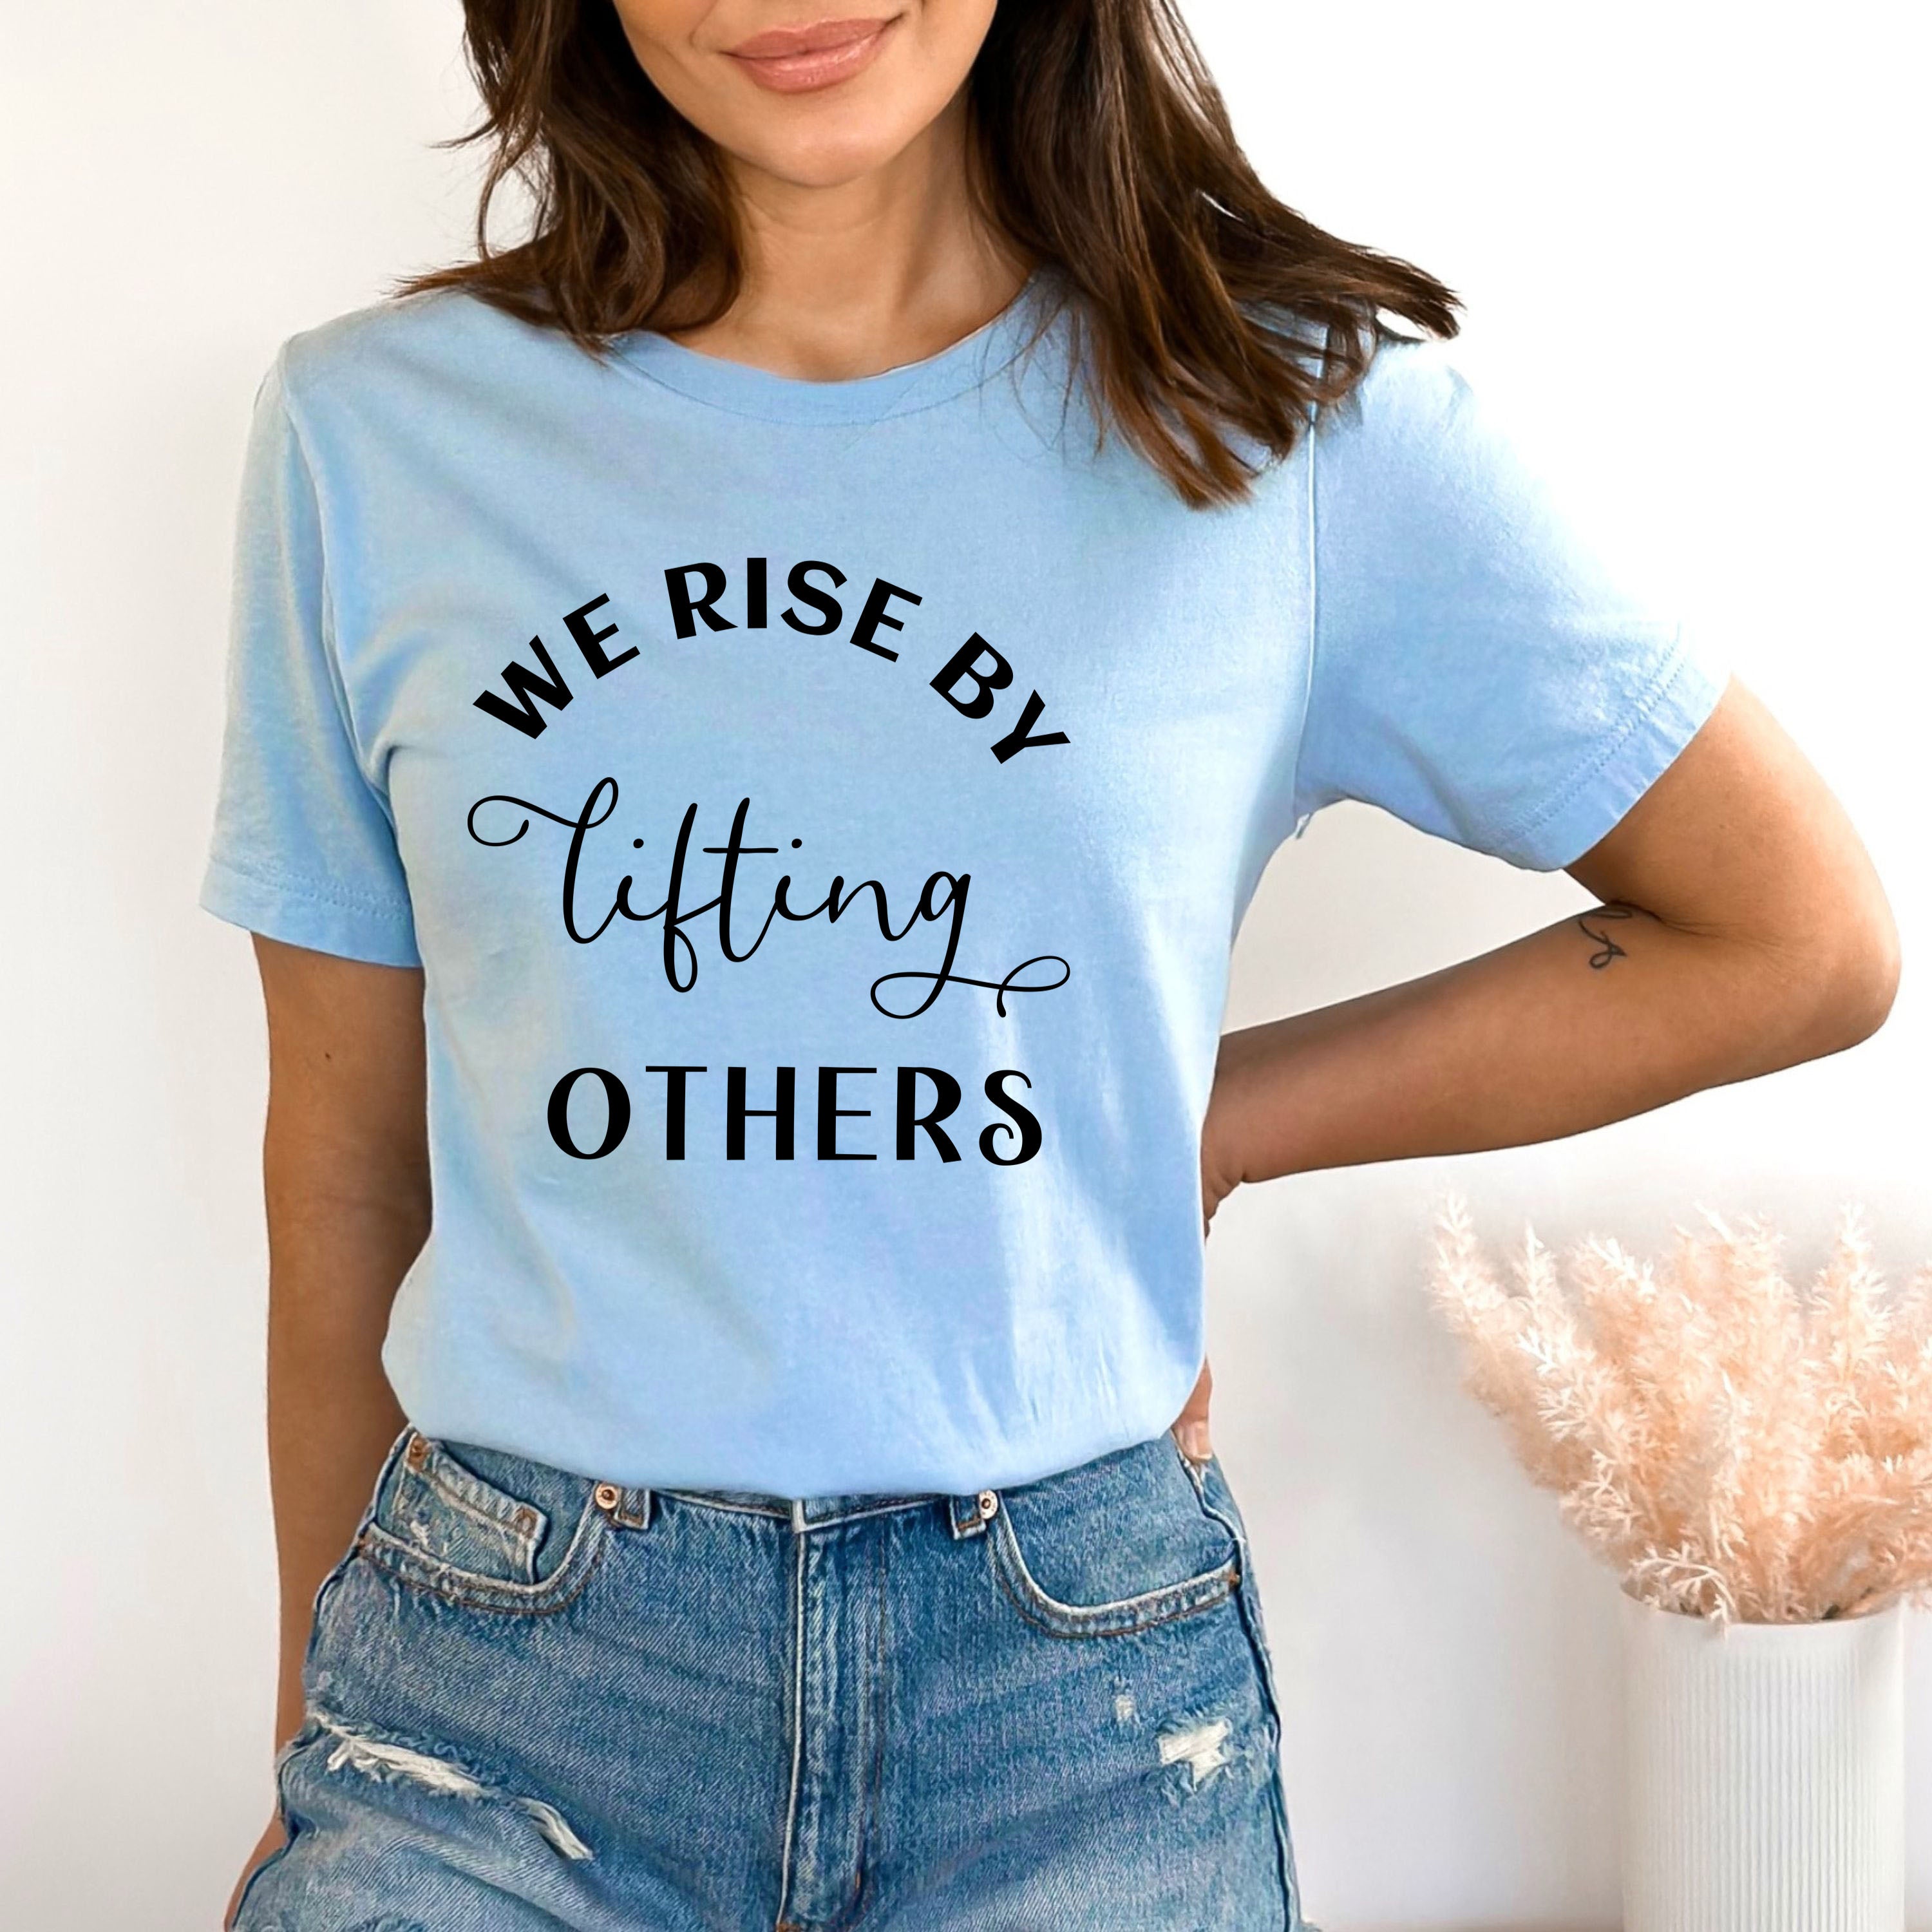 We Rise By Lifting Others - Bella canvas